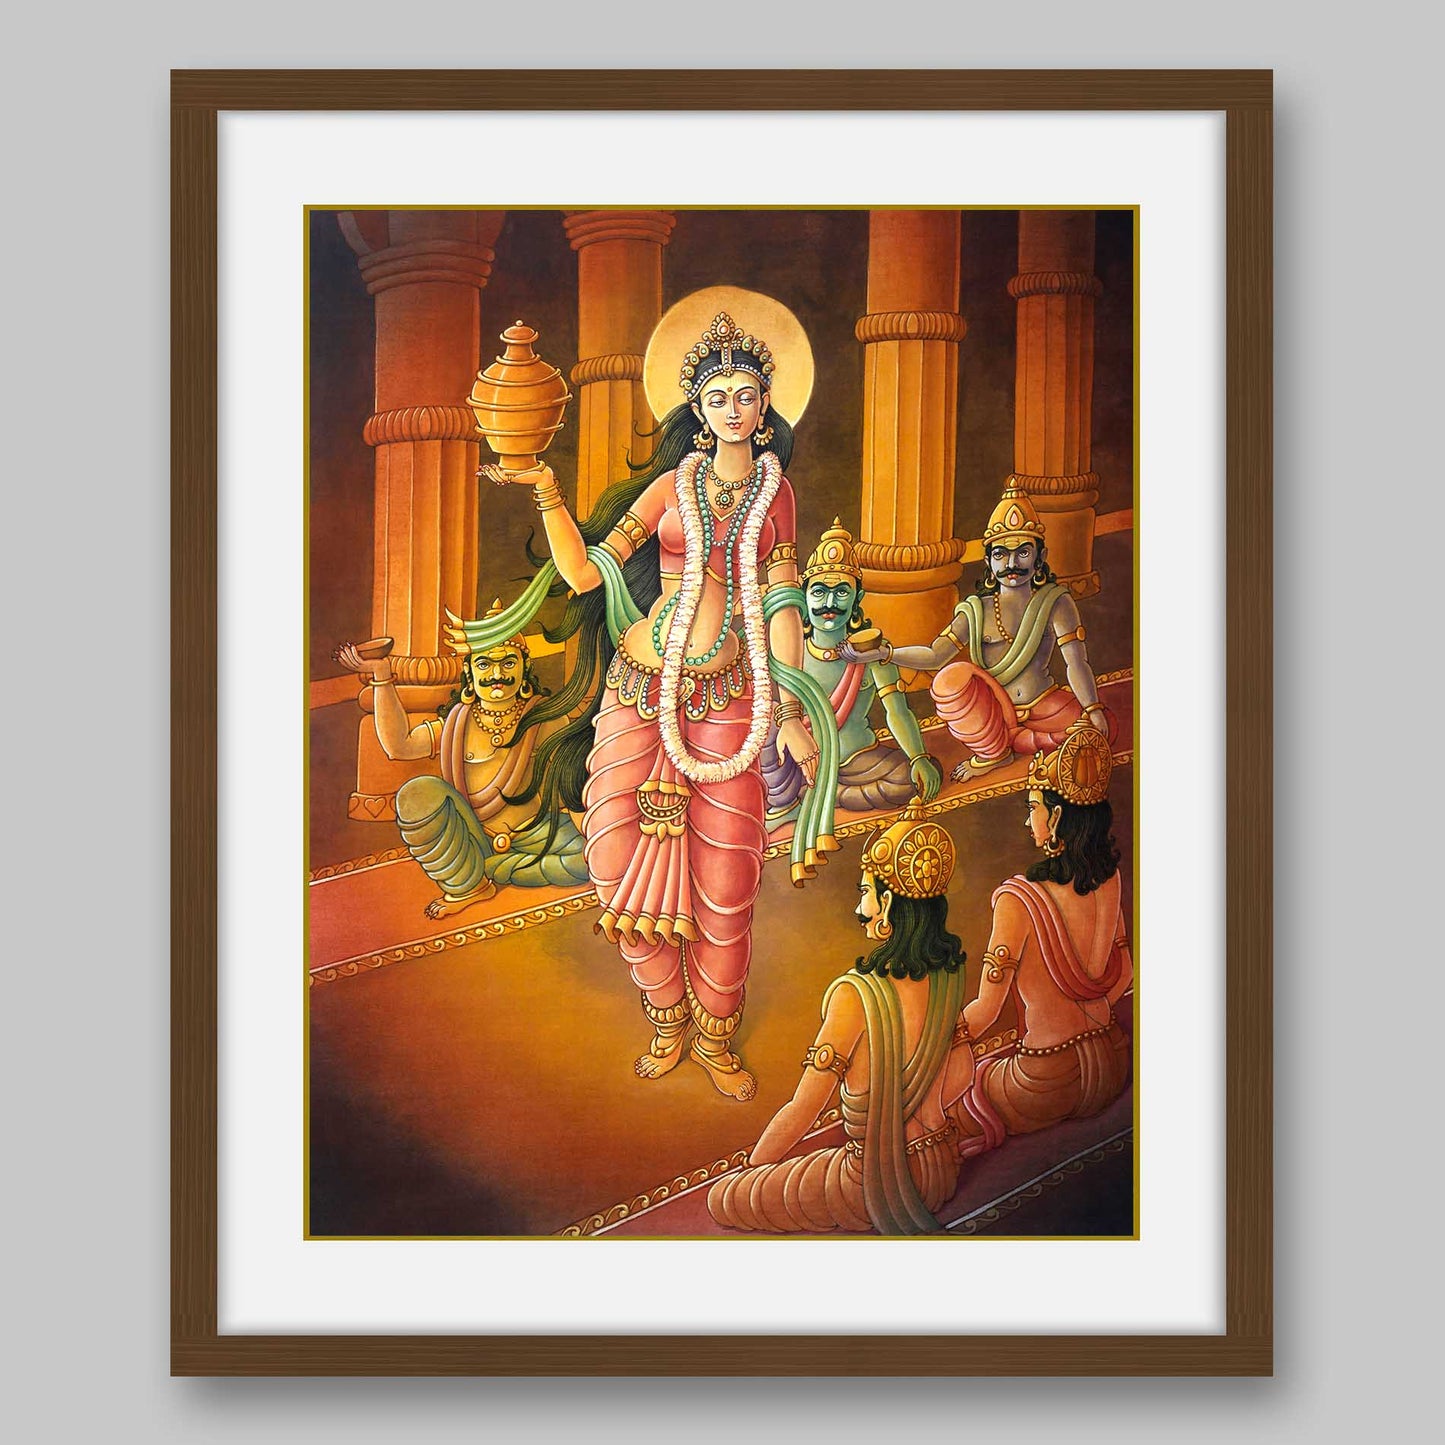 Mohini – High Quality Print of Artwork by Pieter Weltevrede